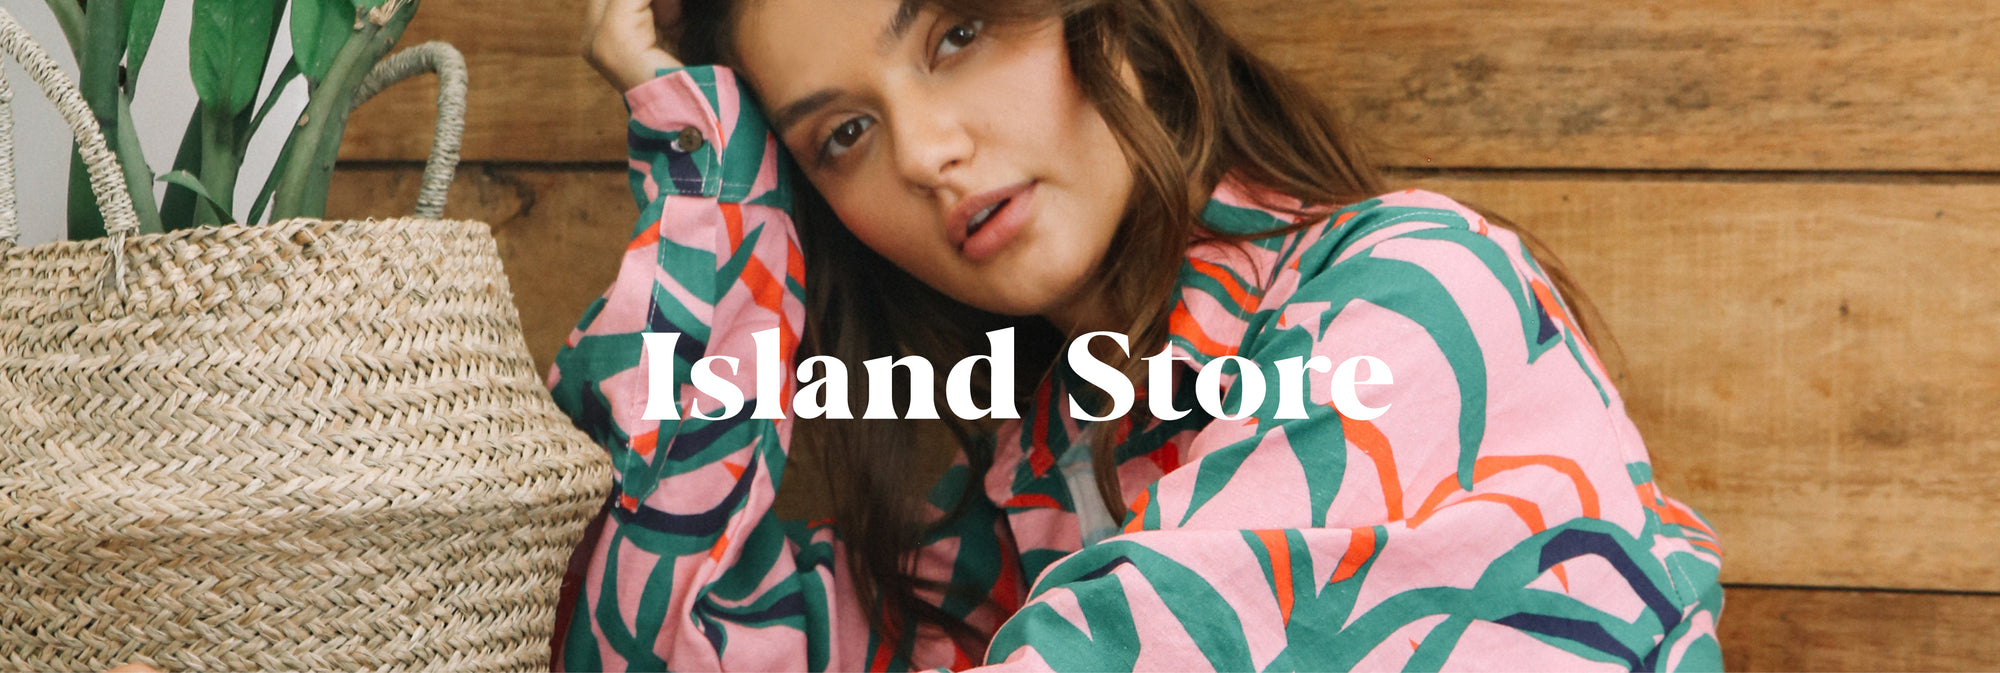 Island Store - Printed Apparel & Accessories